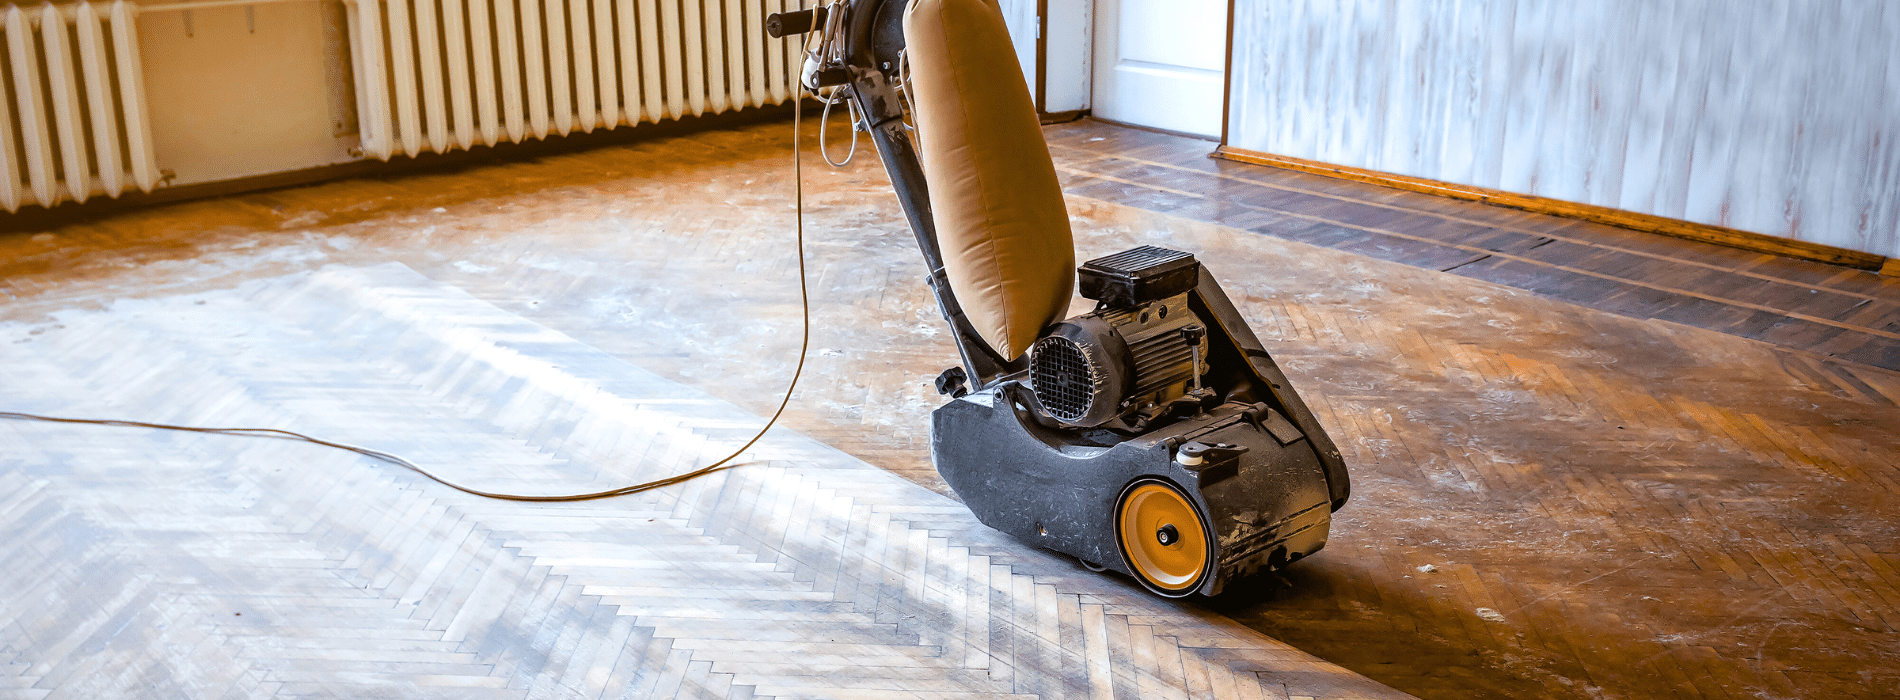 Mr Sander® utilize a Bona Scorpion drum sander (200mm) with a 1.5kW power, operating at 240V and 50Hz frequency. This sander, connected to a dust extraction system featuring a HEPA filter, ensures a pristine and effective sanding process for hardwood floors.